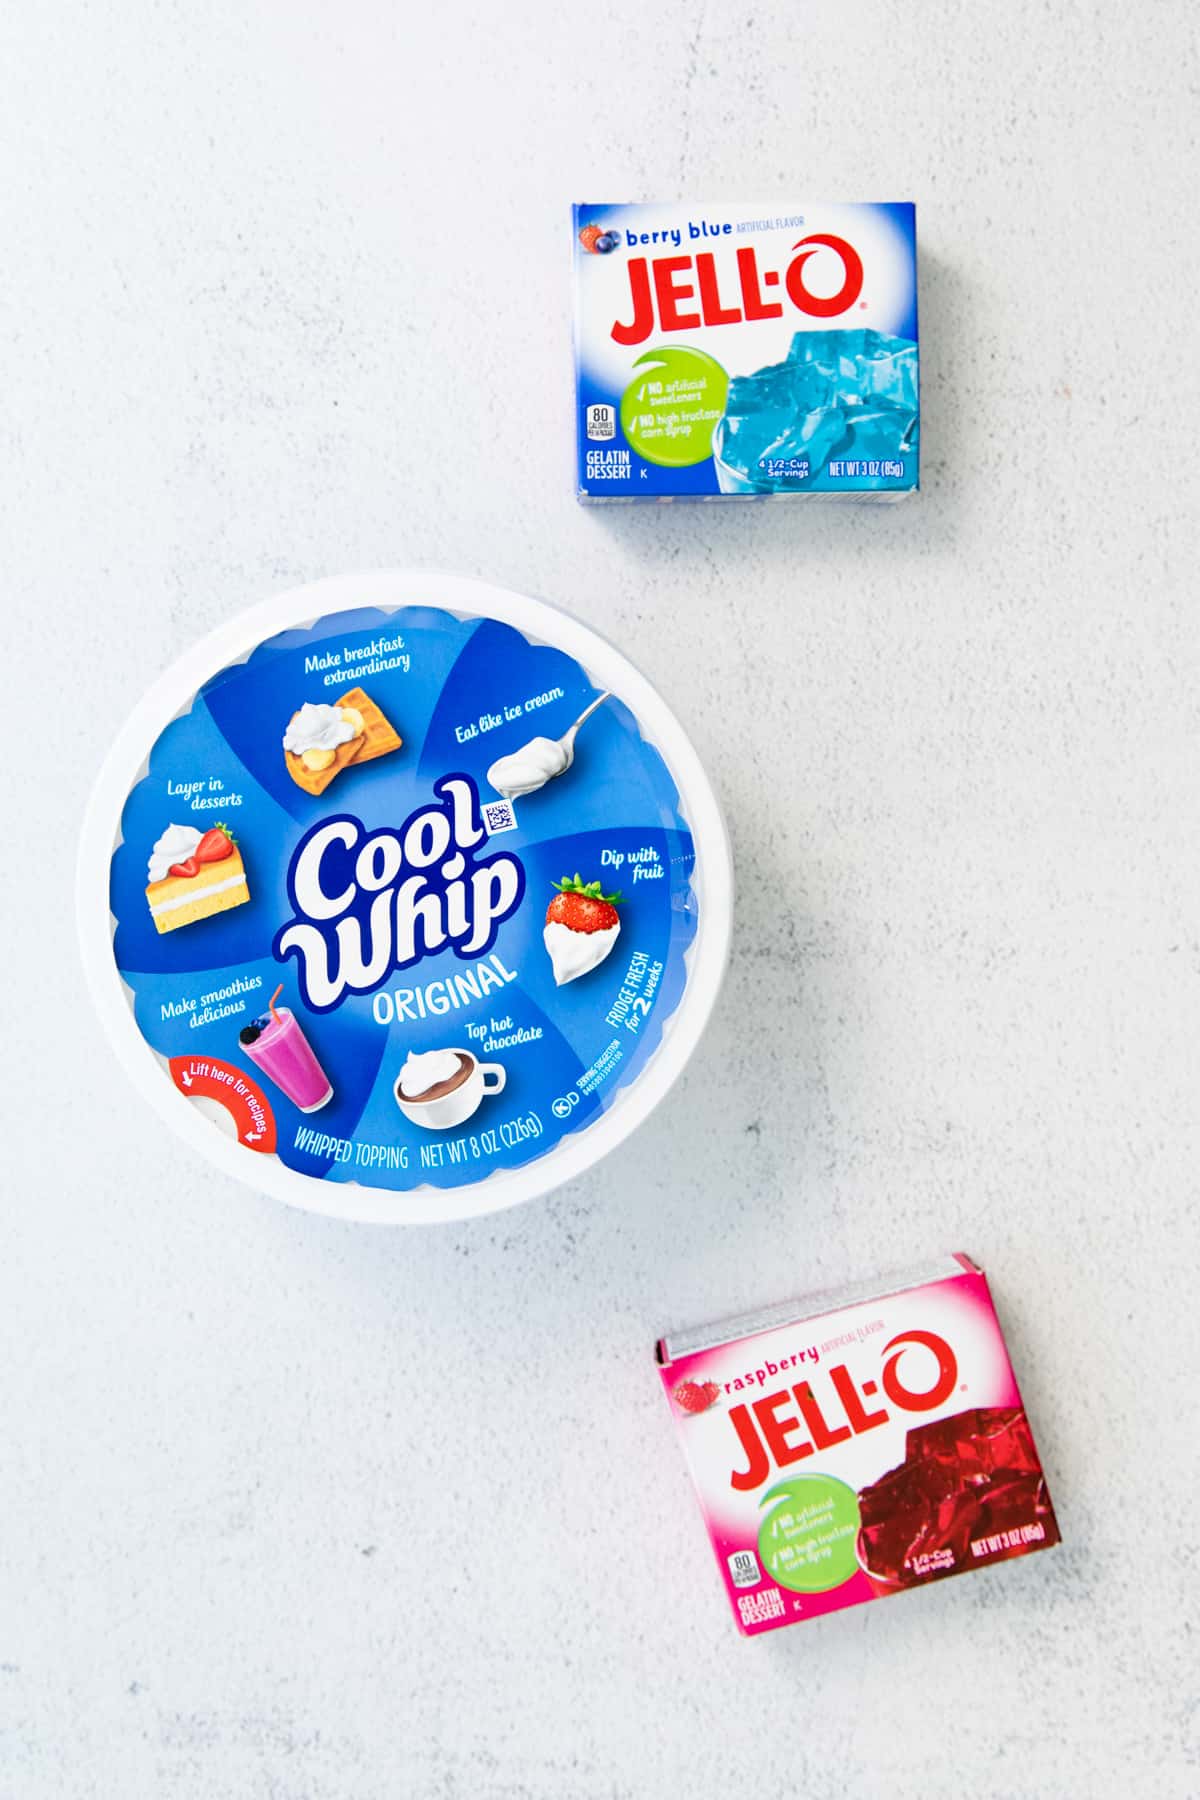 3 ounce box of Berry Blue Jello, 3 oz box of Raspberry Jello, and 8 oz tub of Cool Whip